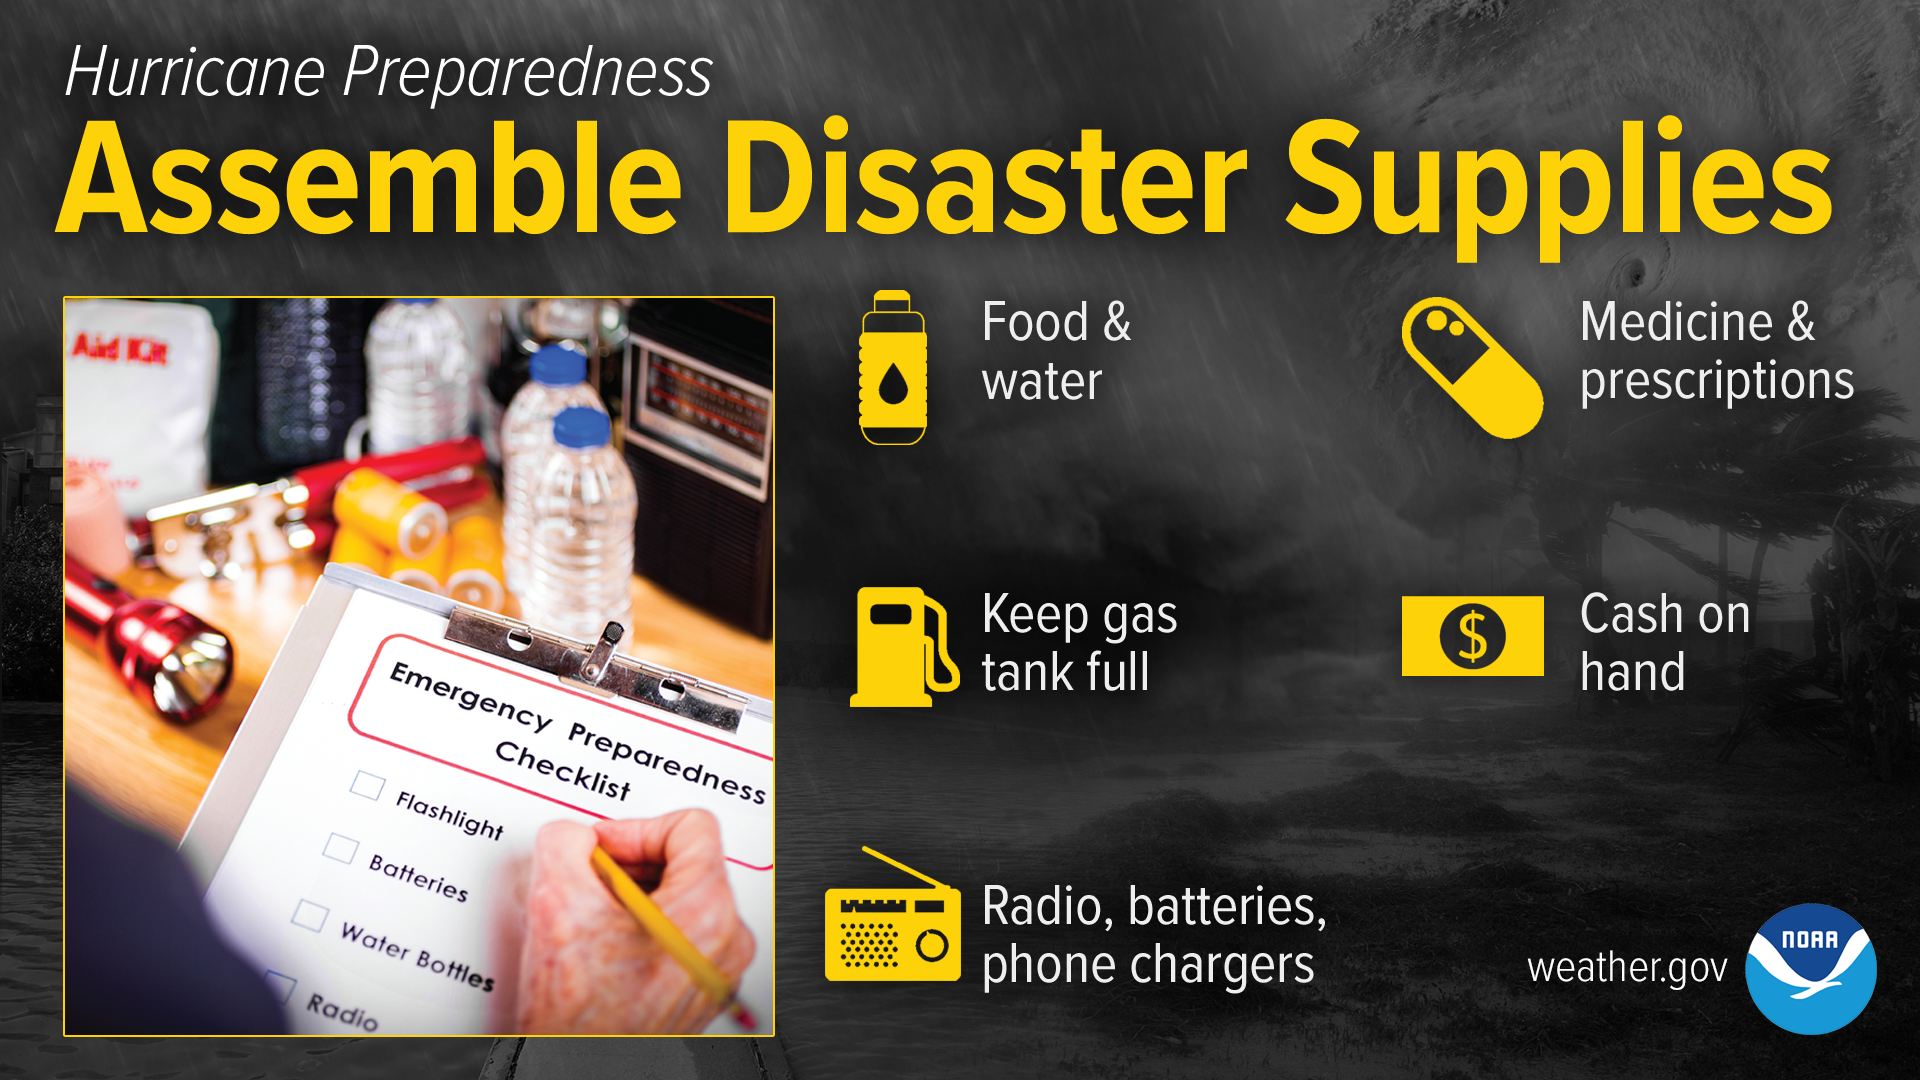 Hurricane Preparedness: Assemble Disaster Supplies. Make a list of supplies and assemble them before hurricane season begins. Have enough food and water for each person for at least three days. Fill your prescriptions and have medicine on hand. Radios, batteries and phone chargers are also must-haves. Gas up your vehicle and have cash on hand.